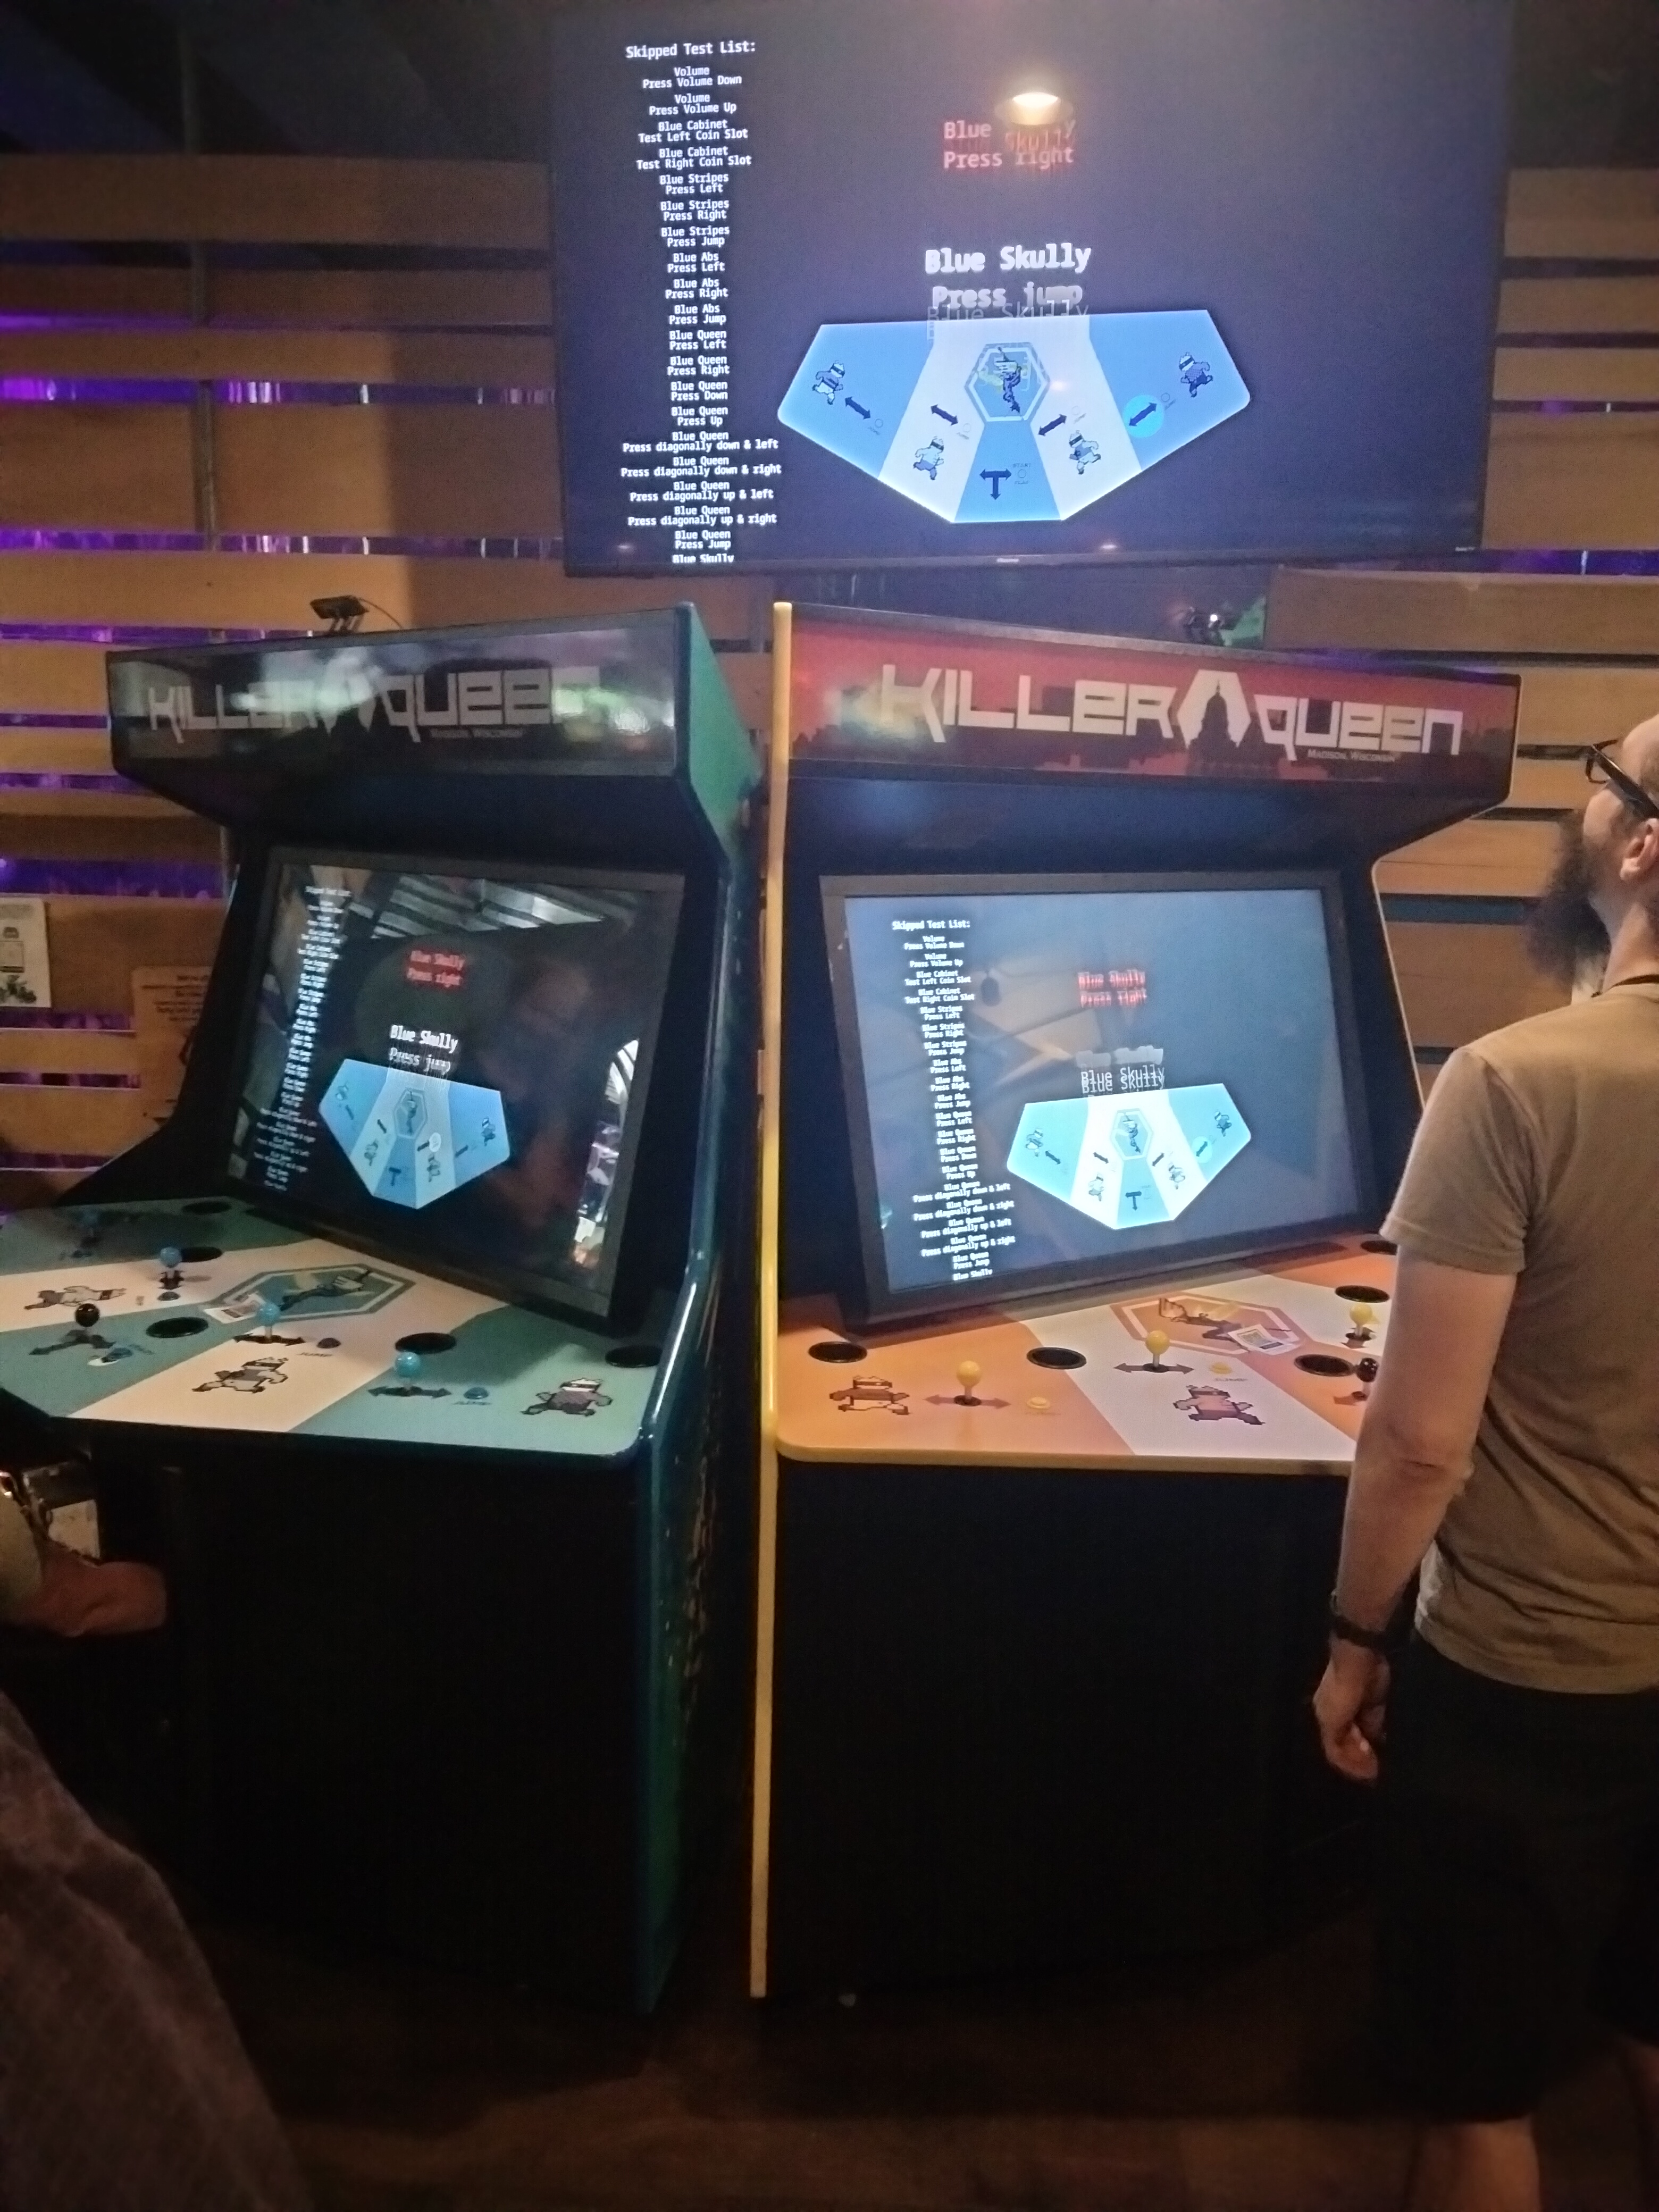 Two large arcade cabinets for Killer Queen, in blue and gold. A separate TV screen is above them, showing the same image that's on both cabinets. Some diagnostics tests are being run on the cabinets.